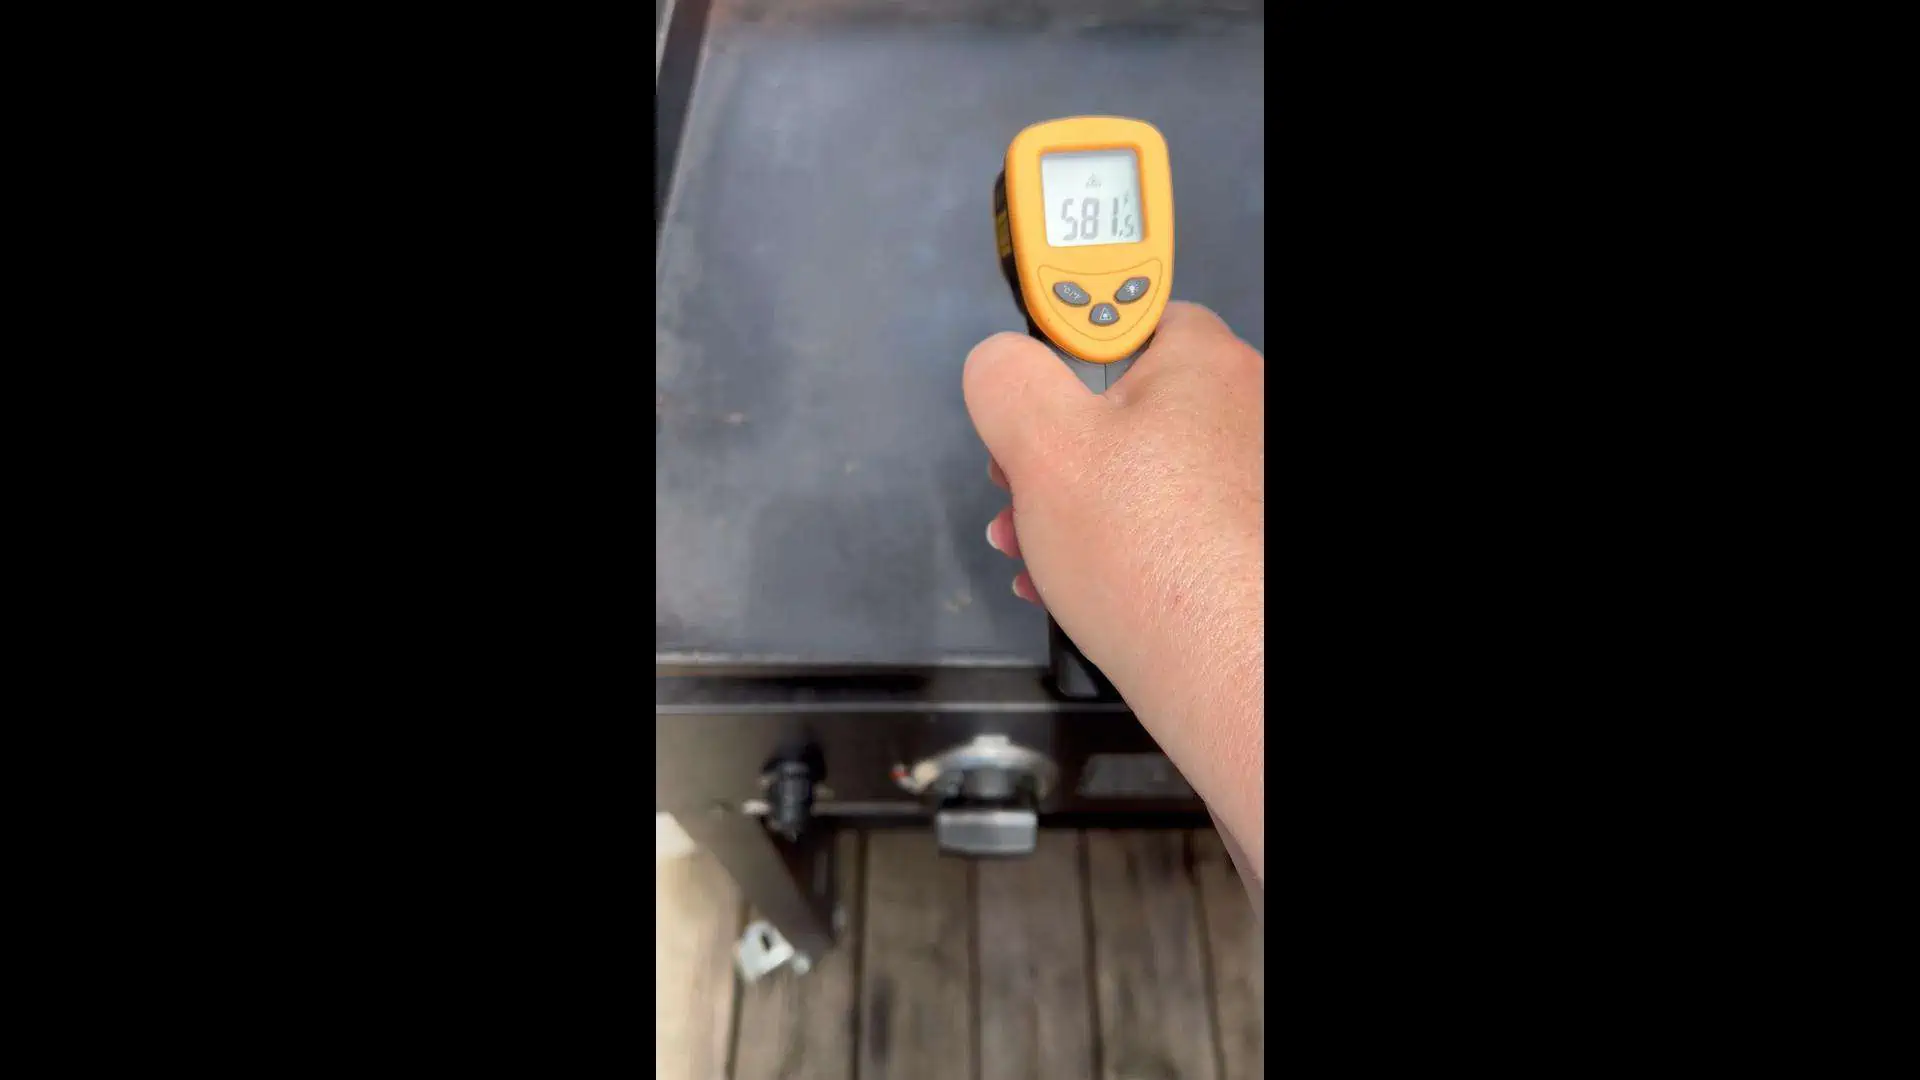 A laser heat thermometer checking the temperature of the griddle.